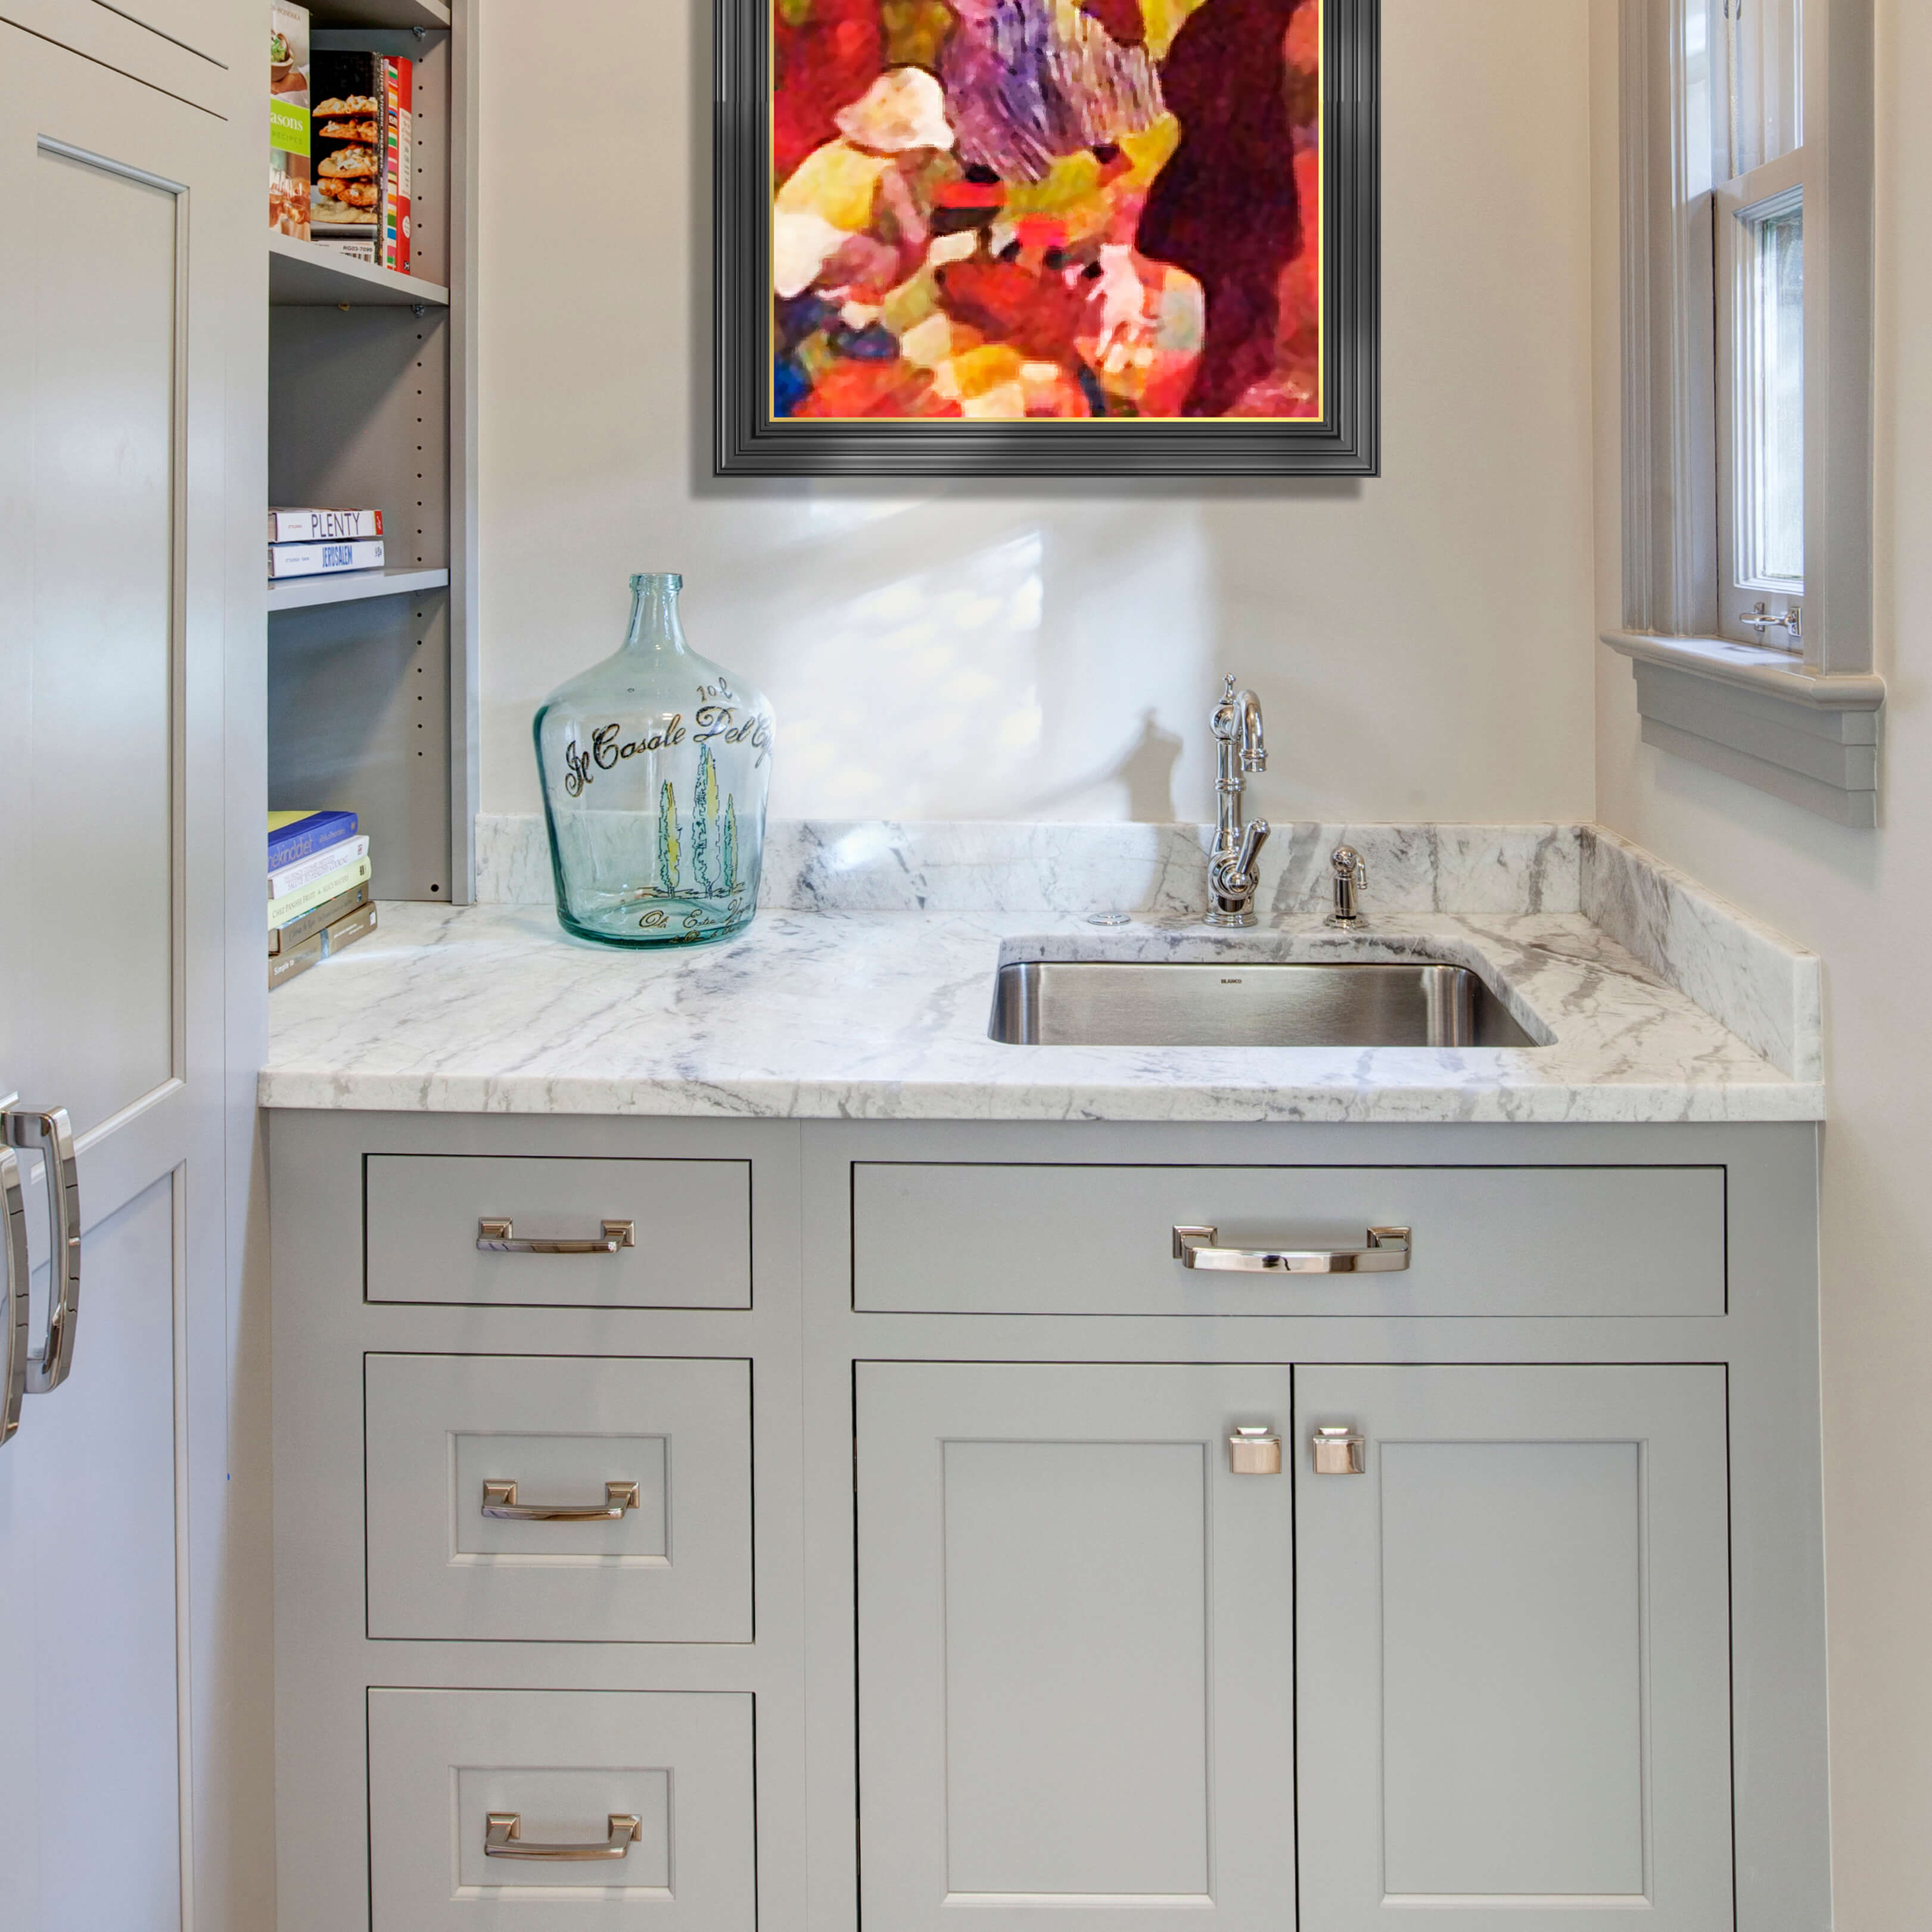 A light gray butler's pantry design with a small prep sink and open shelves tucked into the wall.